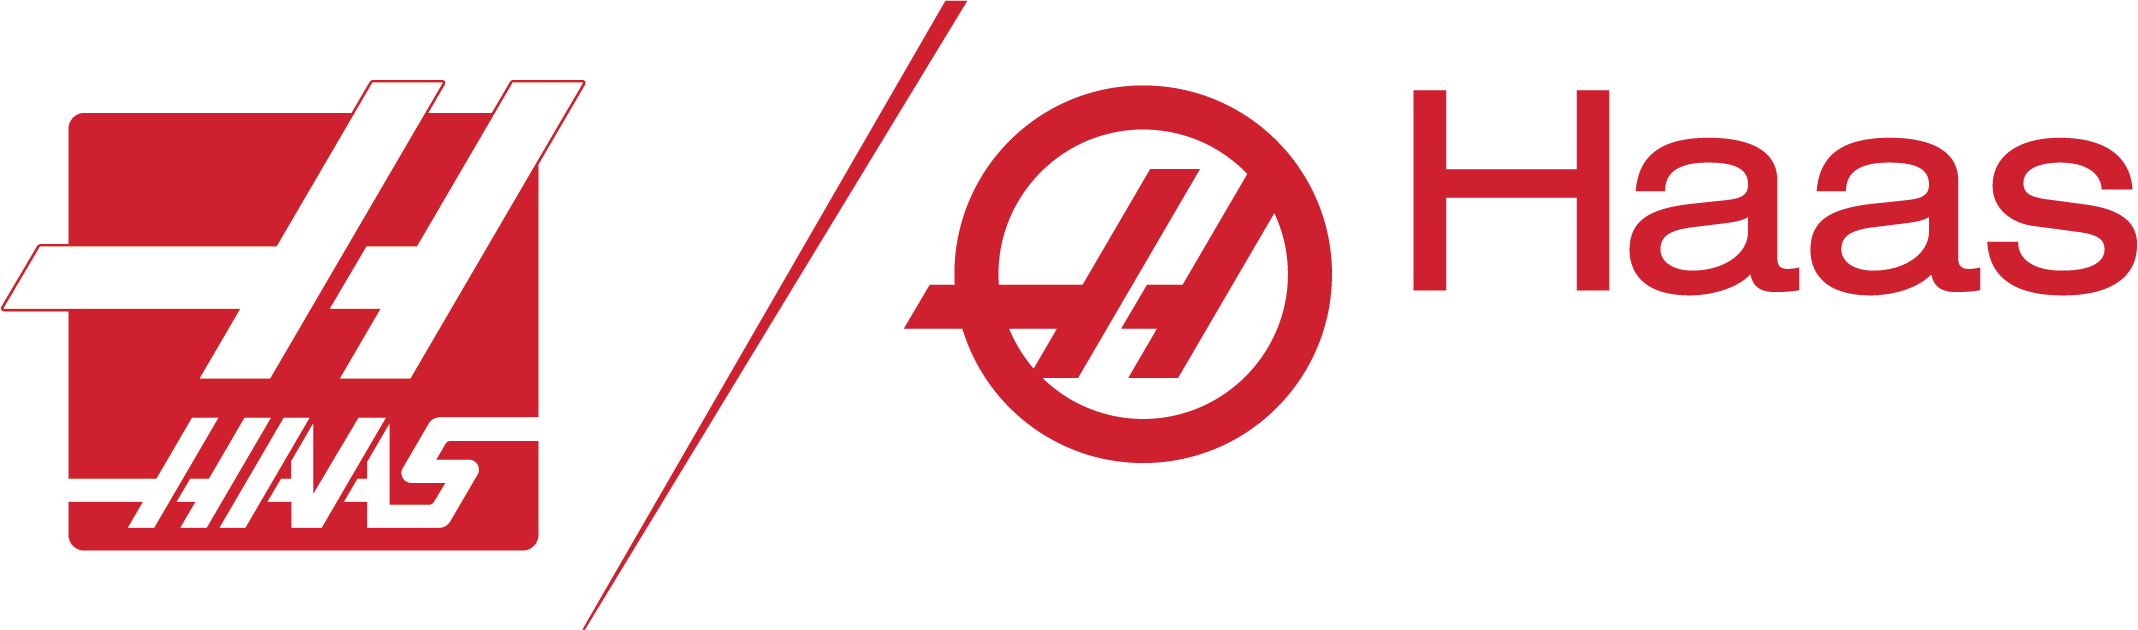 HAAS Automation UK